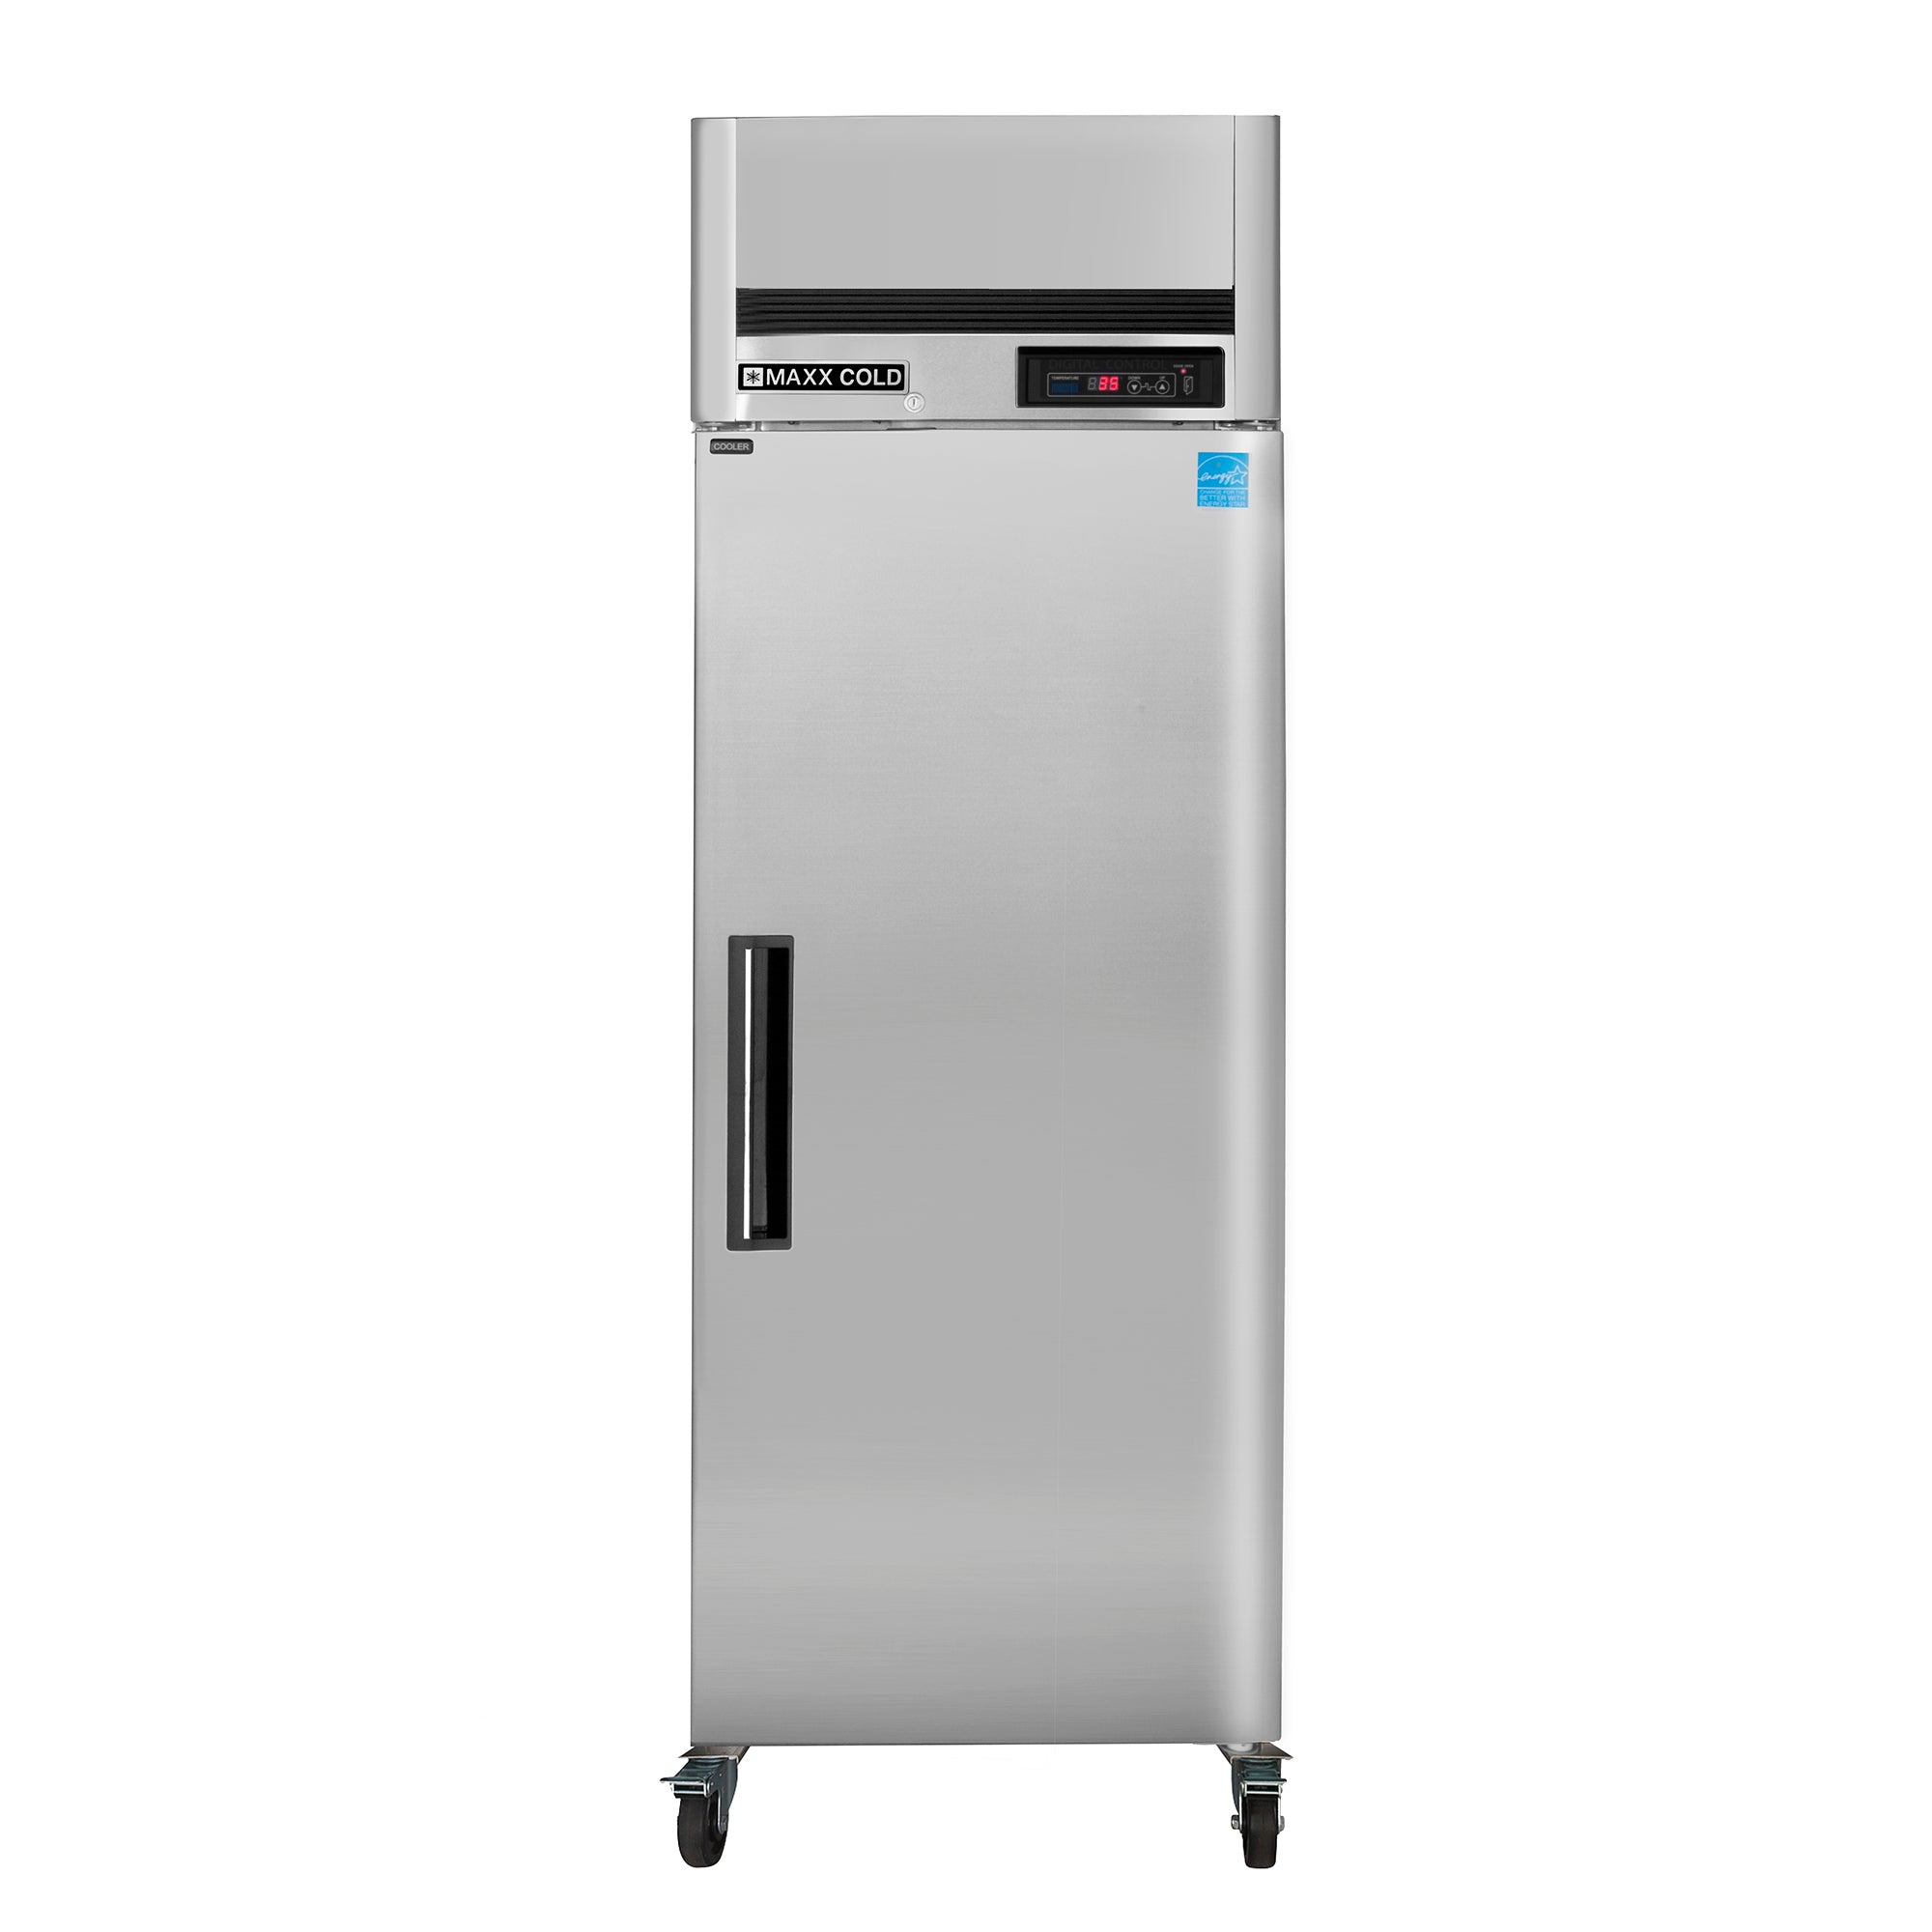 Maxx Cold - MCRT-23FDHC, Maxx Cold Single Door Reach-In Refrigerator Top Mount, 27", 23 cu. ft. Storage Capacity, Energy Star Rated, in Stainless Steel